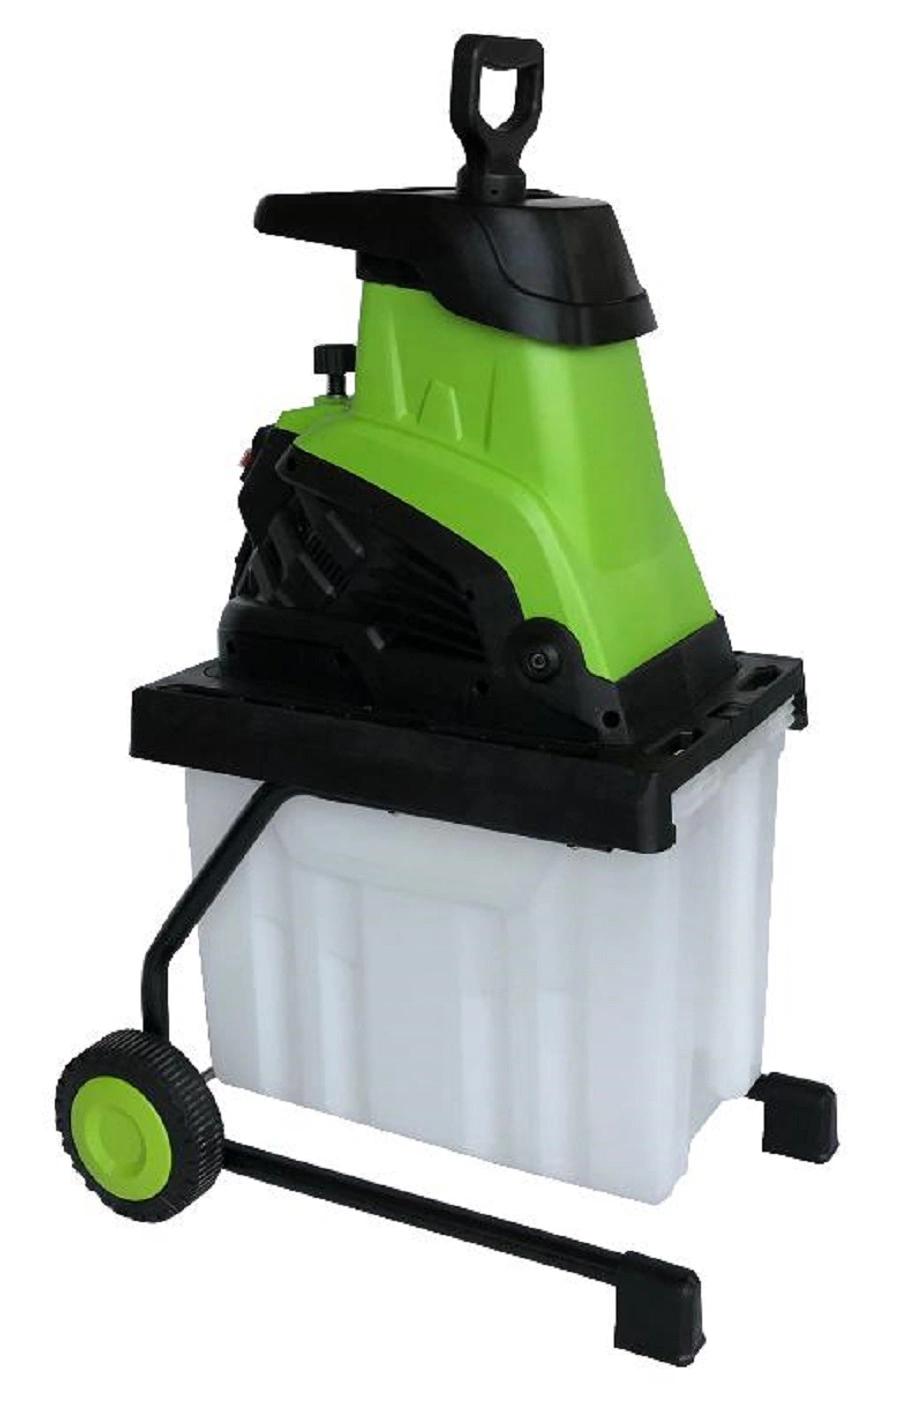 45L-Whole/Fully Plastic Collection Box-2500W Powerful Electric Garden Shredder Machine-Power Tools